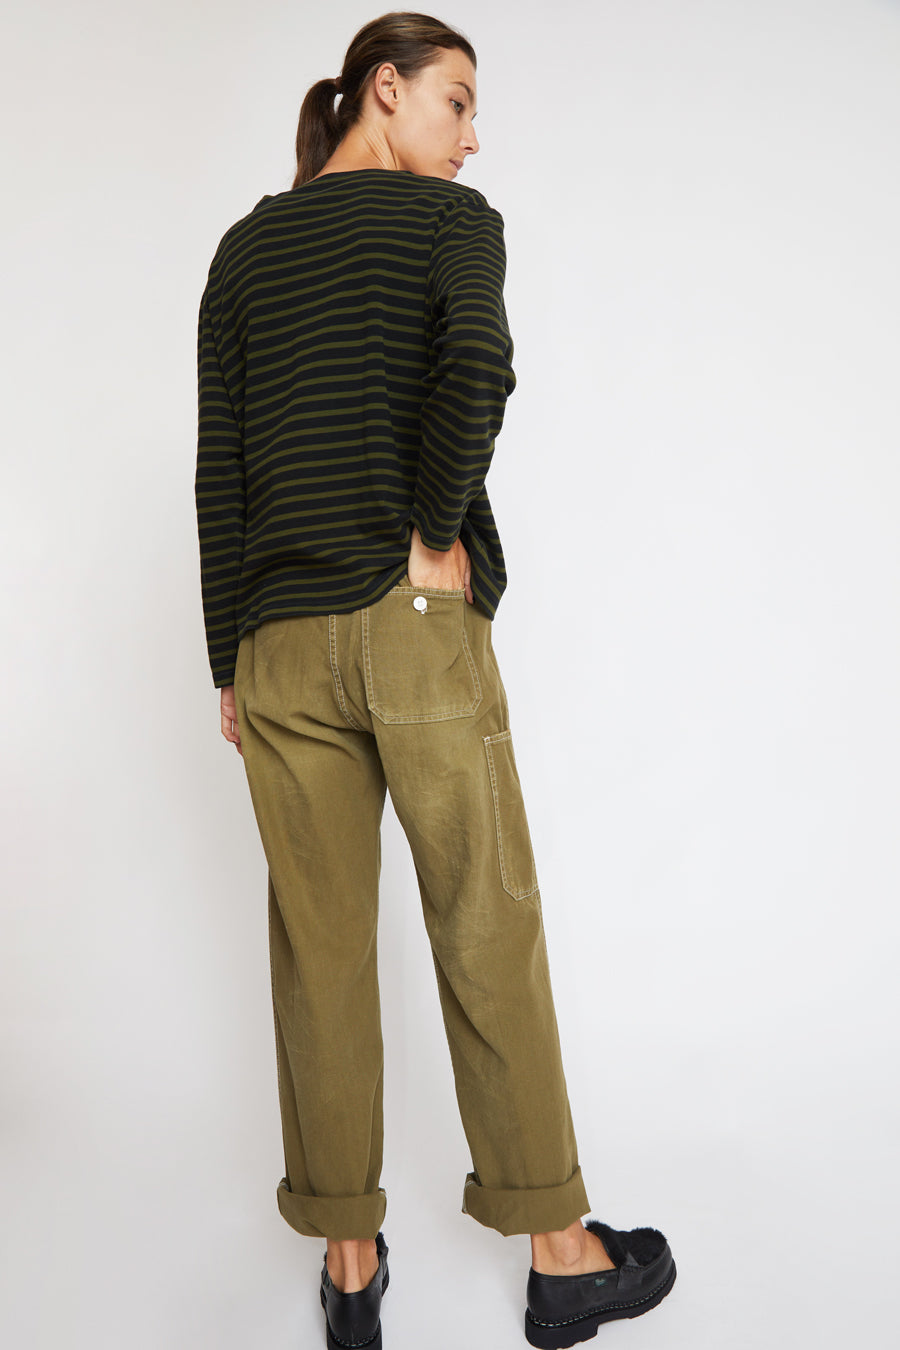 Sultan Wash Work Pant in Stone Olive